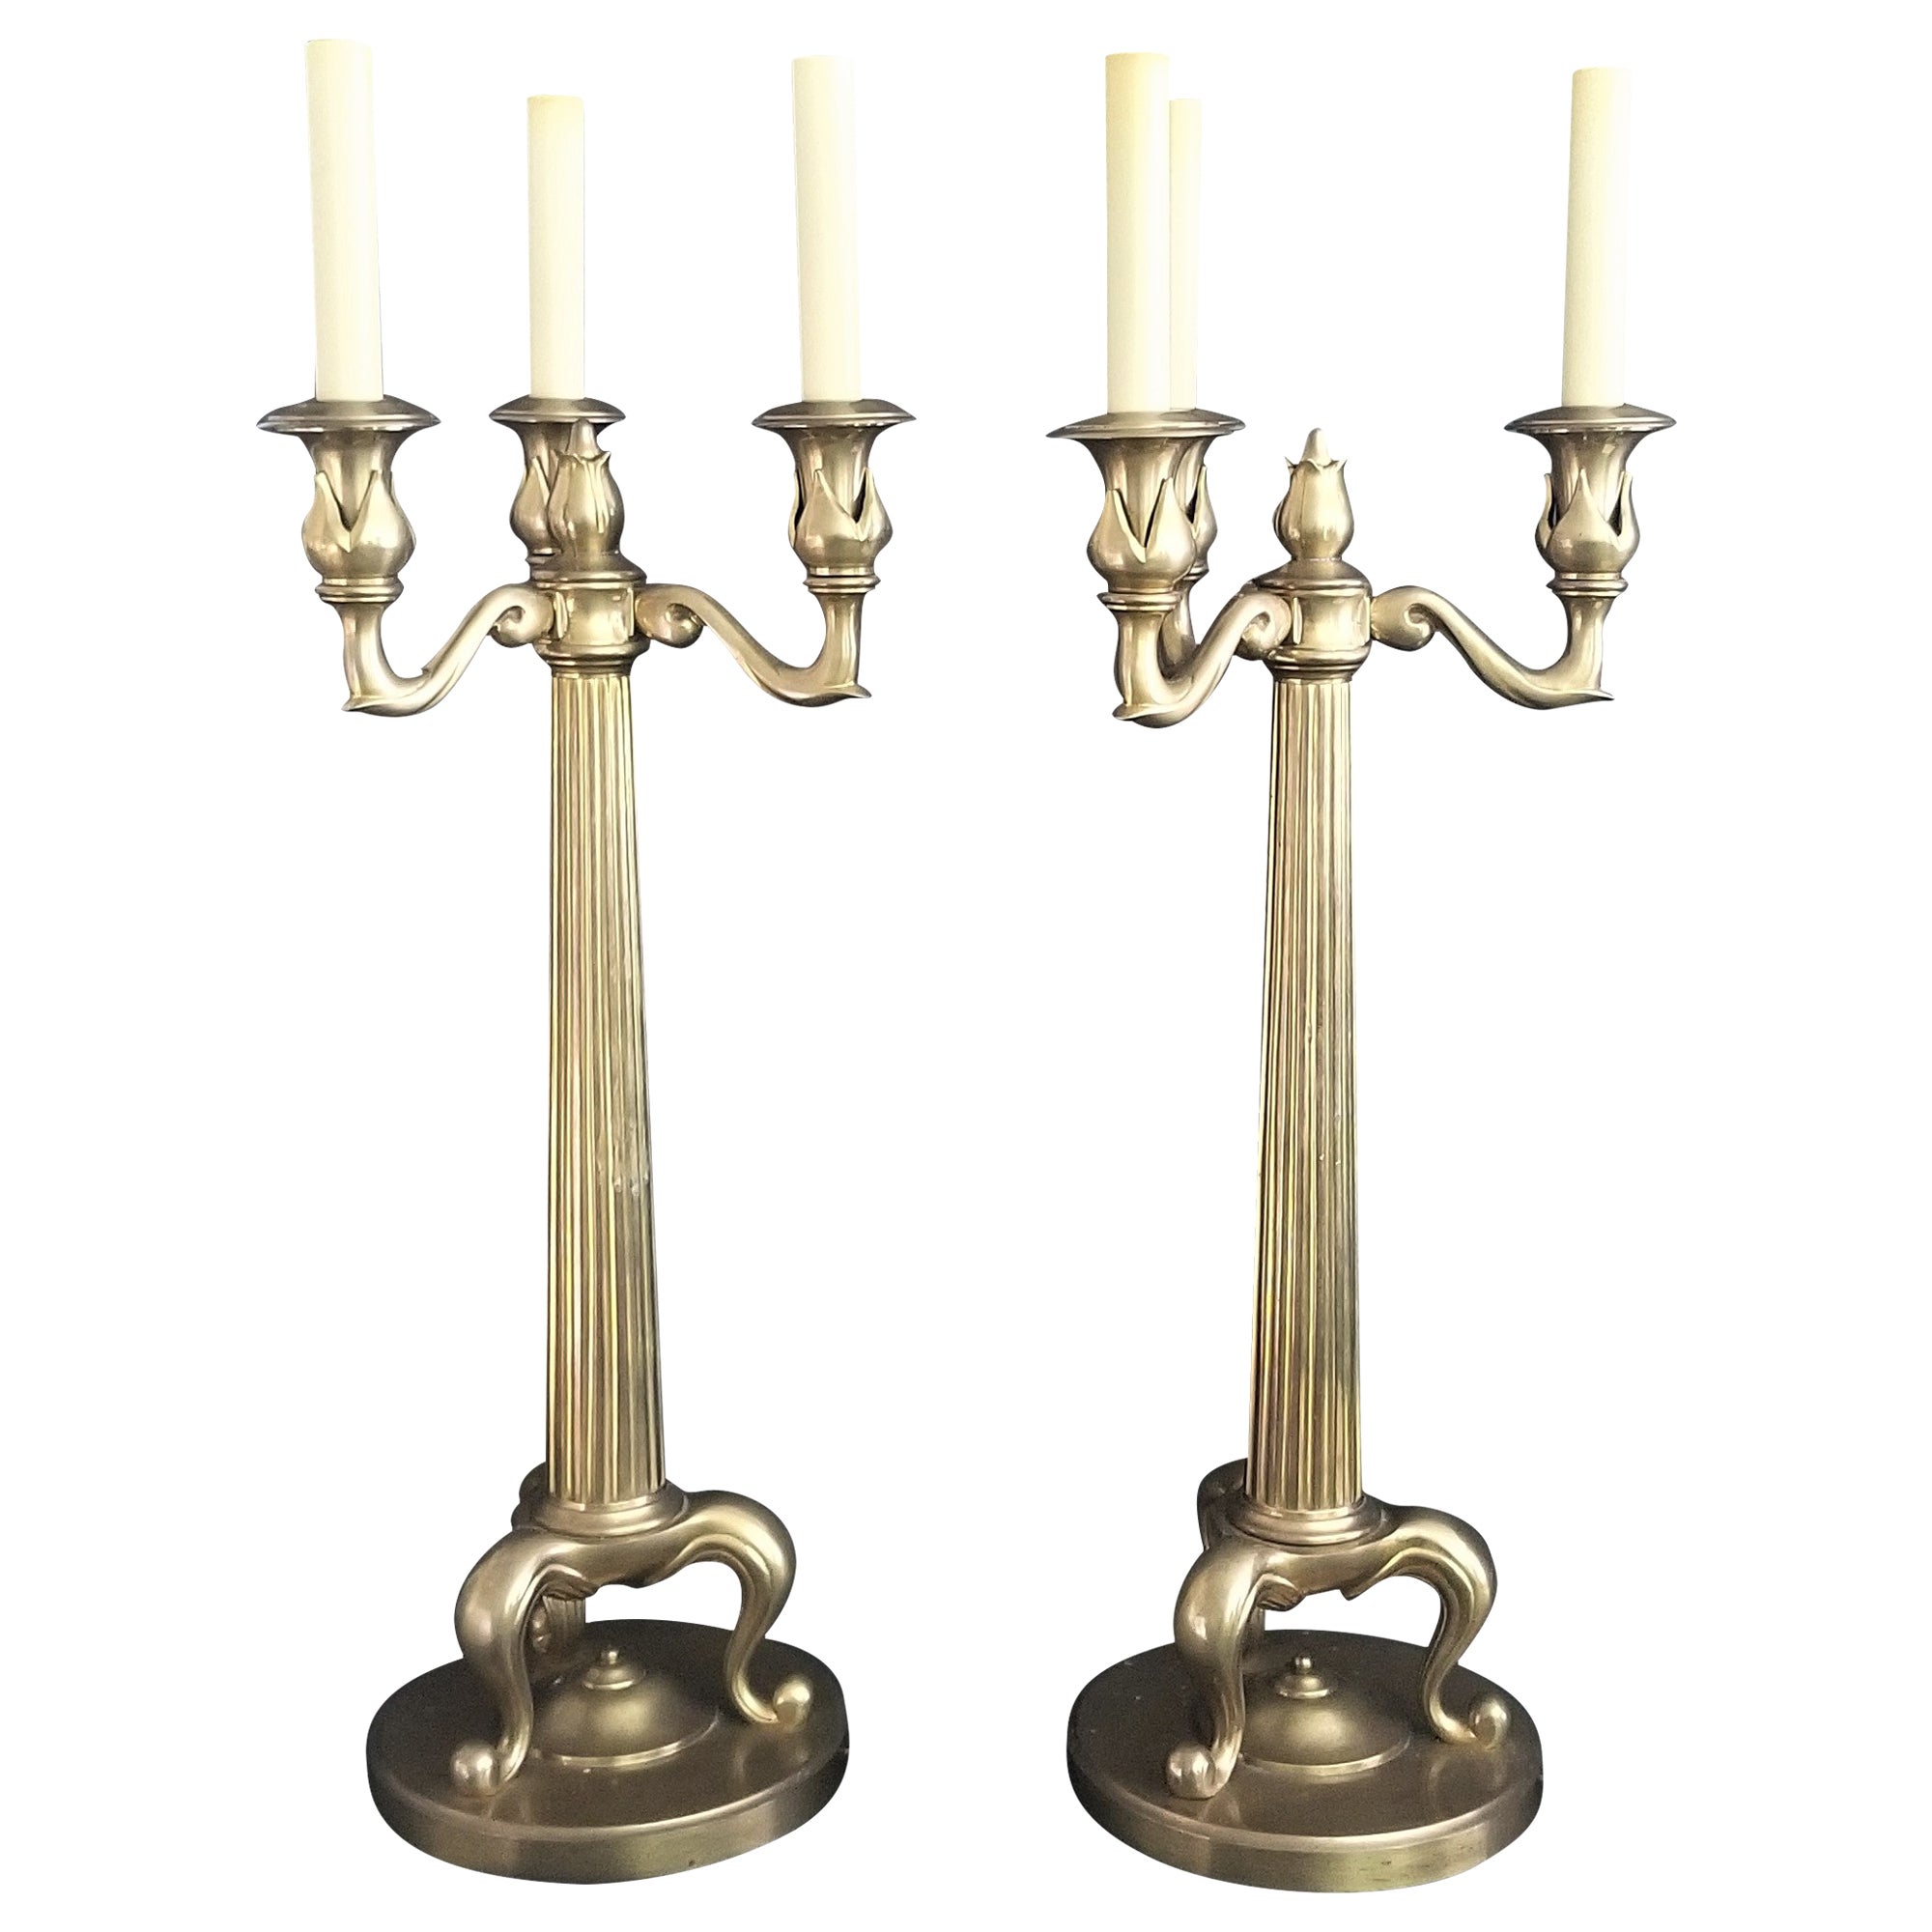 Chapman Heavy Brass Candelabra Fluted Column Table Lamps For Sale